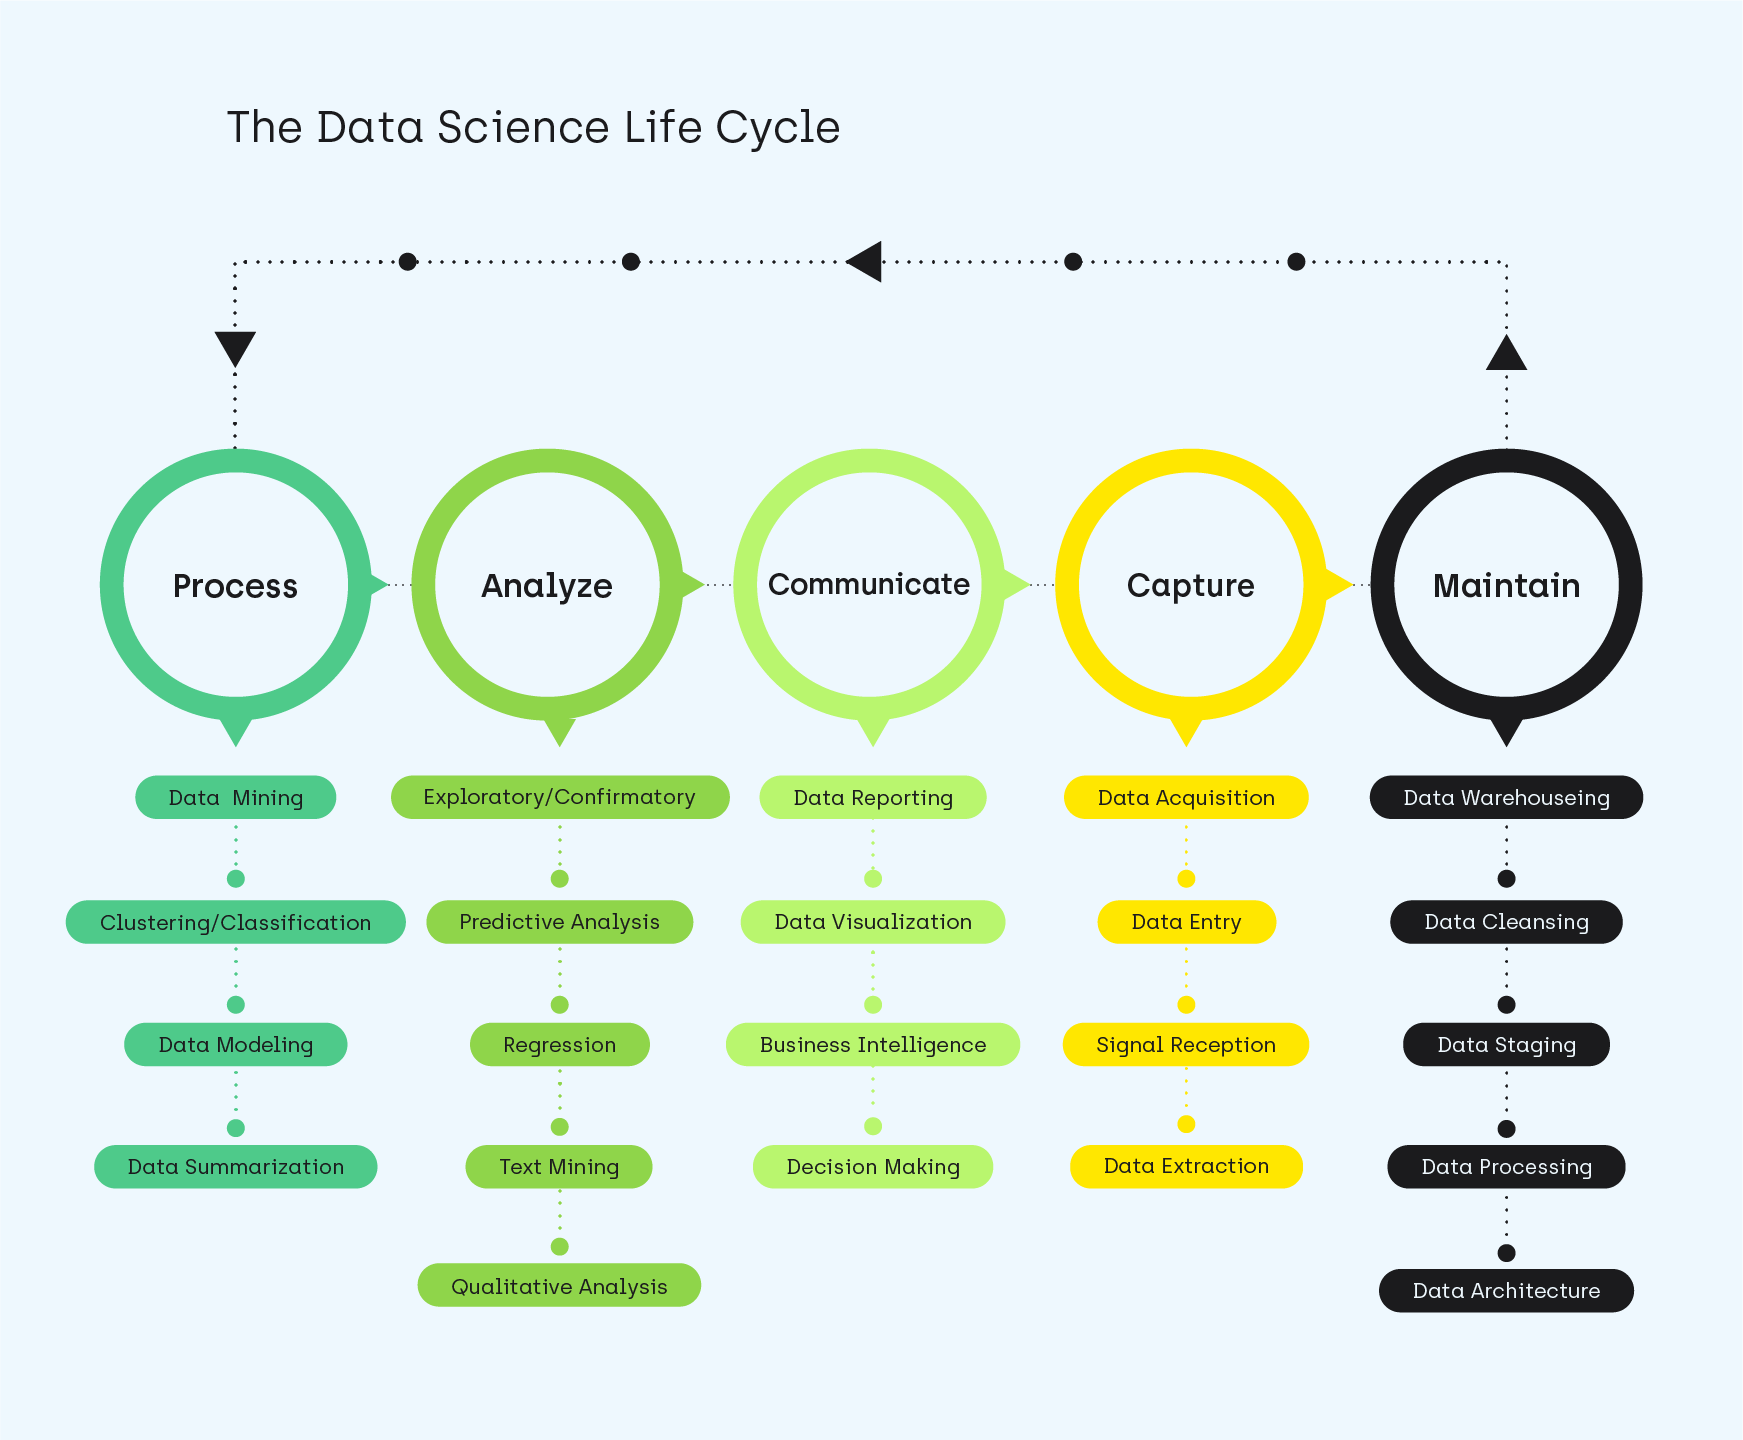 The Data Science lifecycle